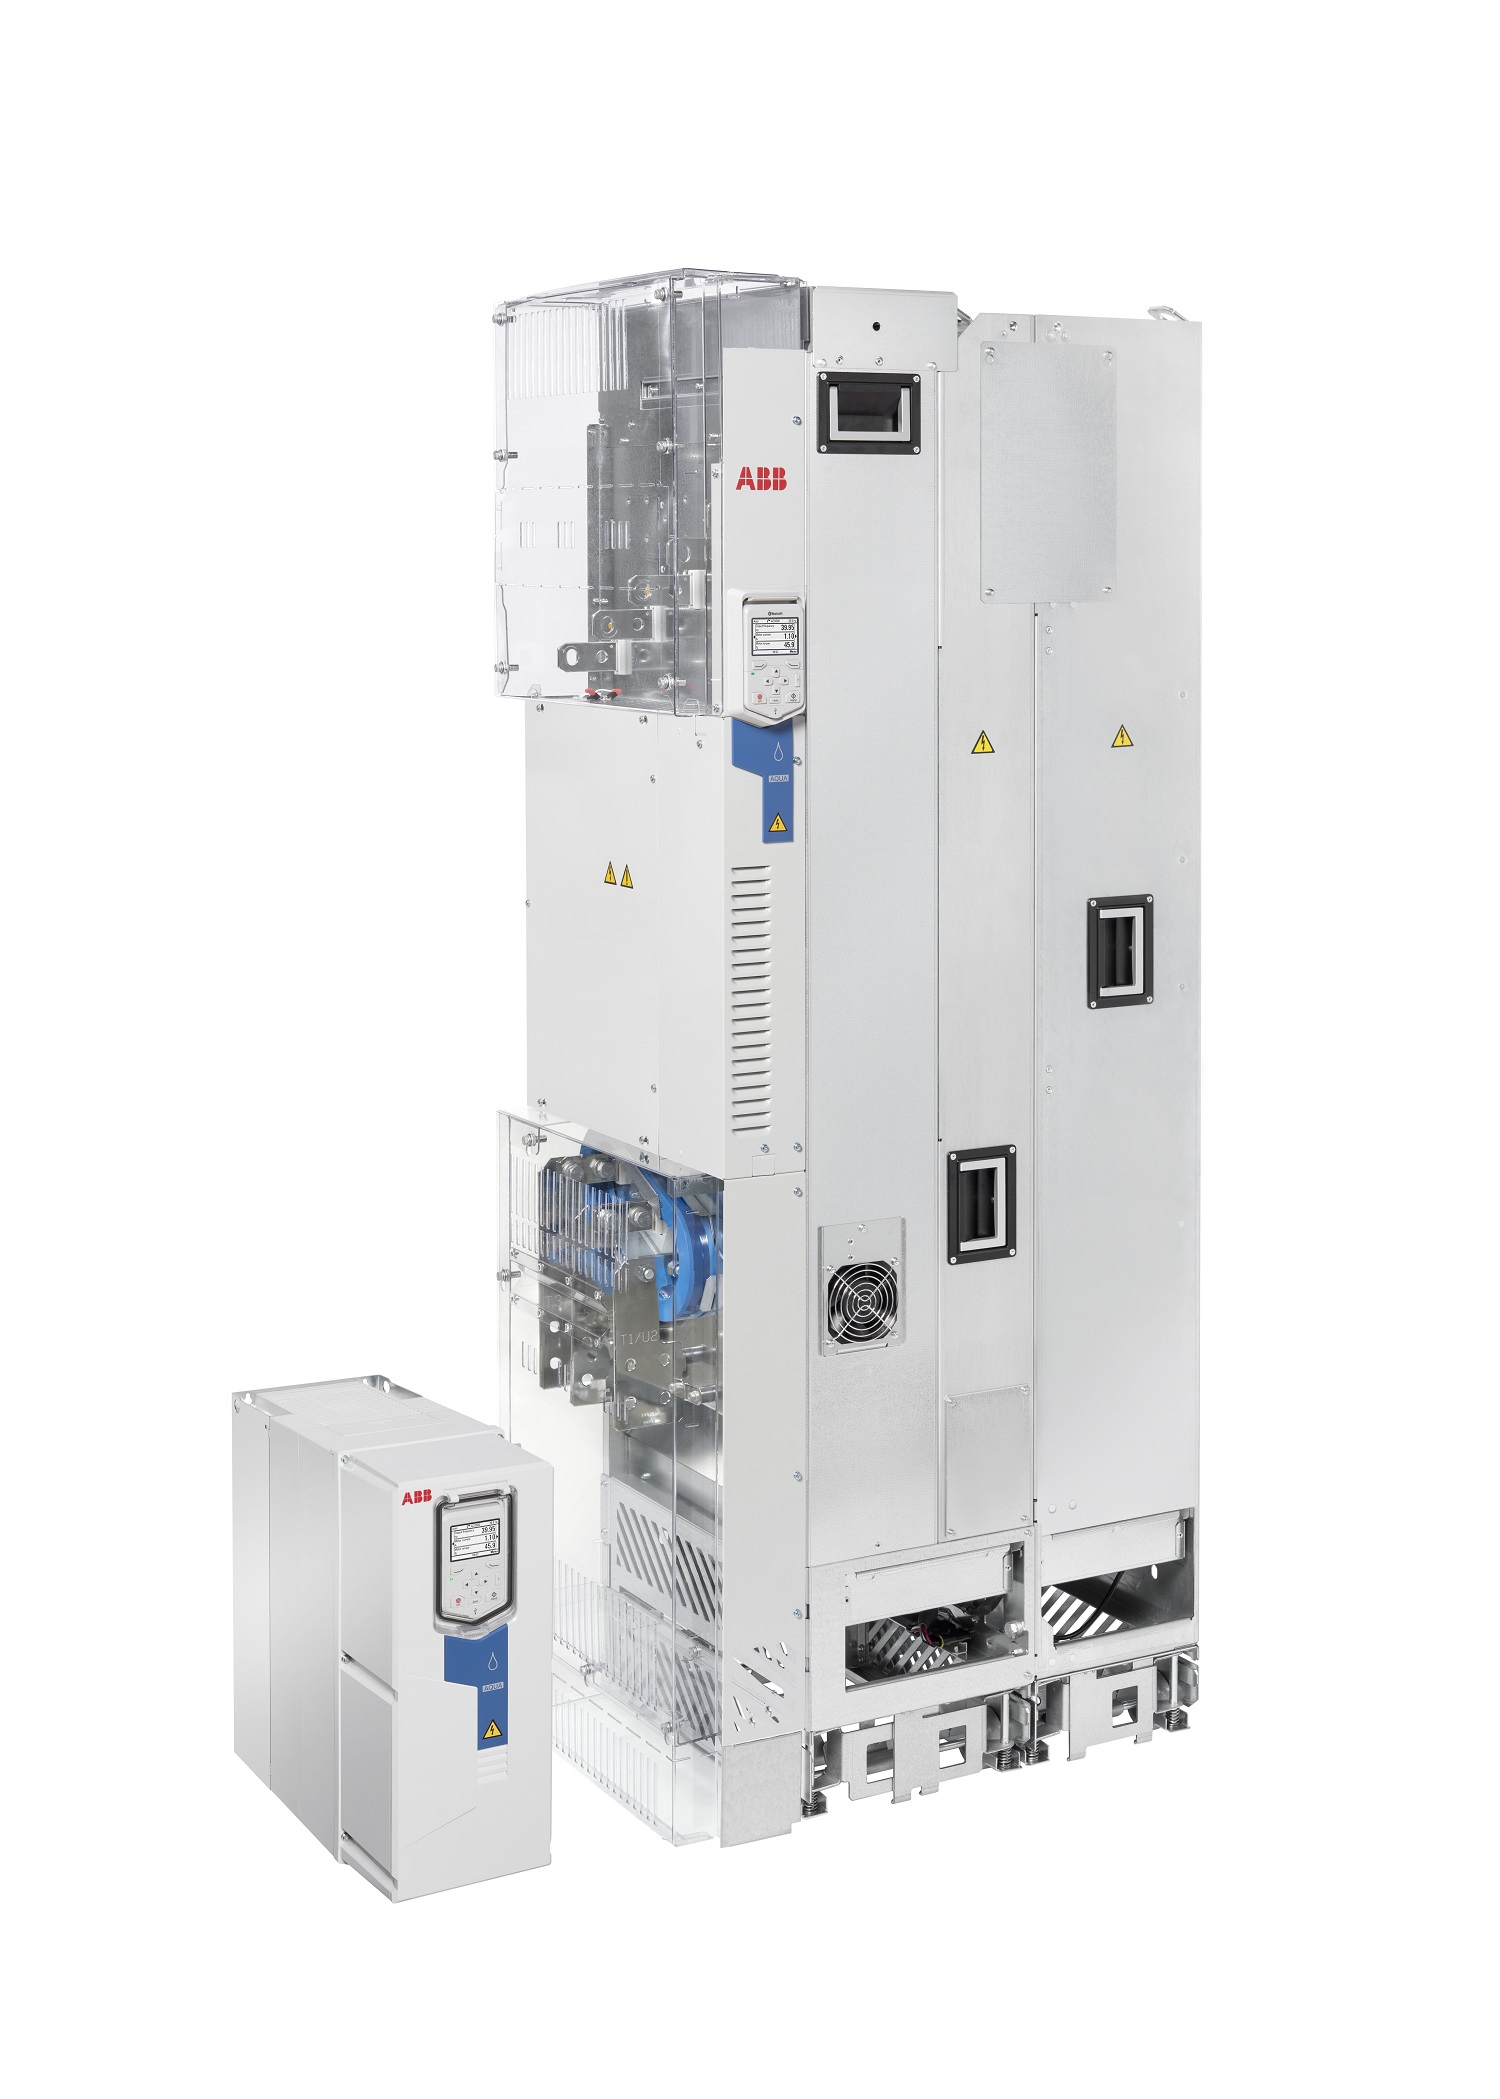 The new ABB drive has harmonic mitigation built-in, including an active supply unit and integrated low harmonic line filter.